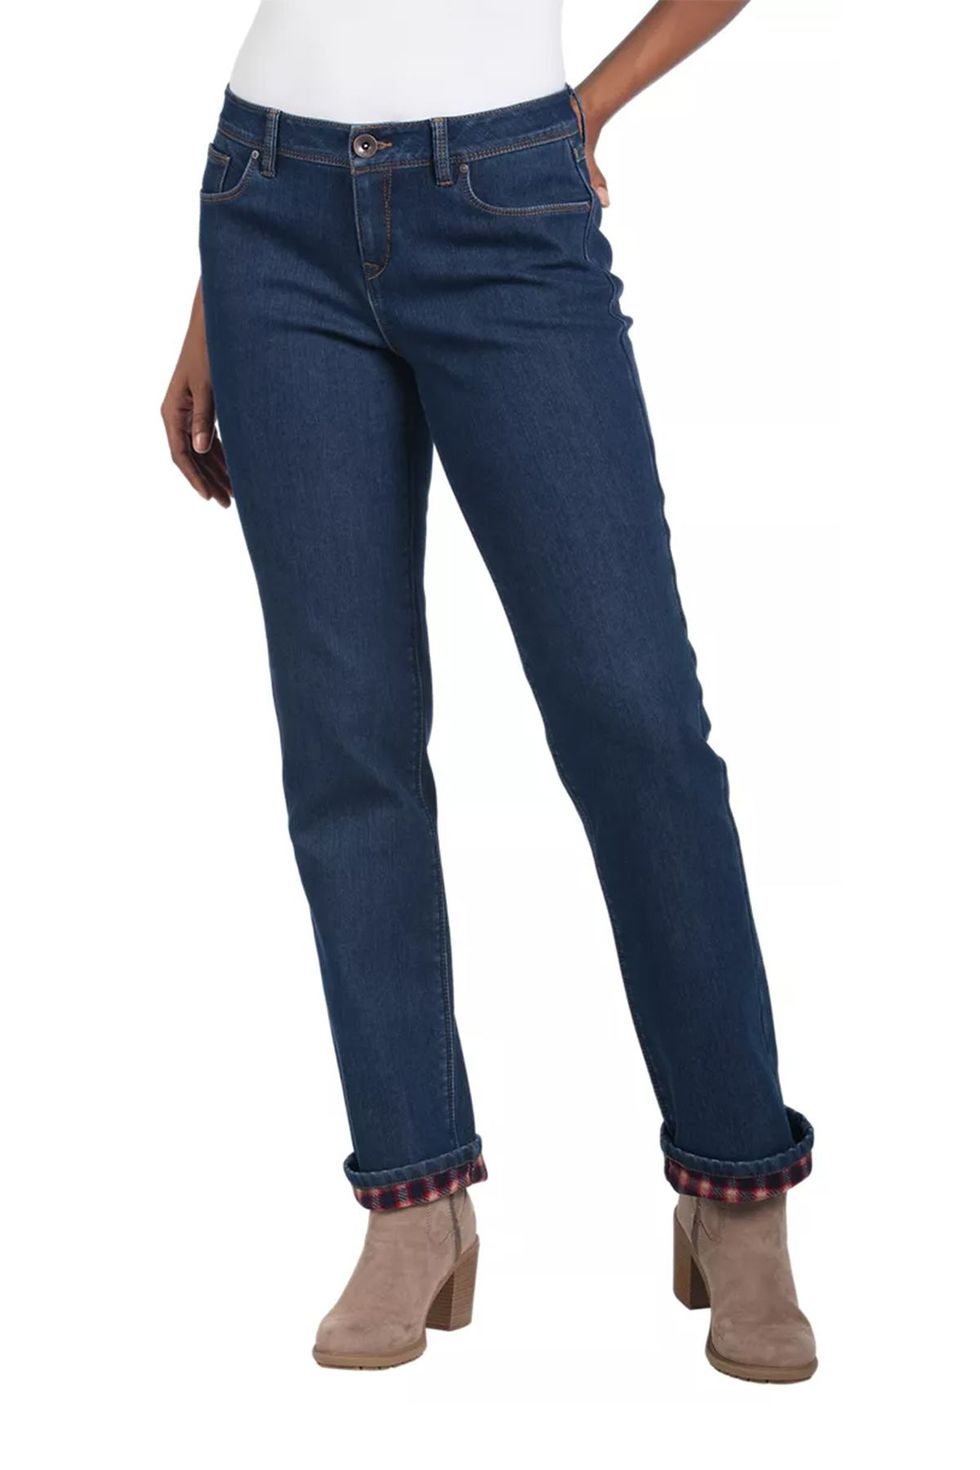 Natural Reflections Fleece-Lined Jeans